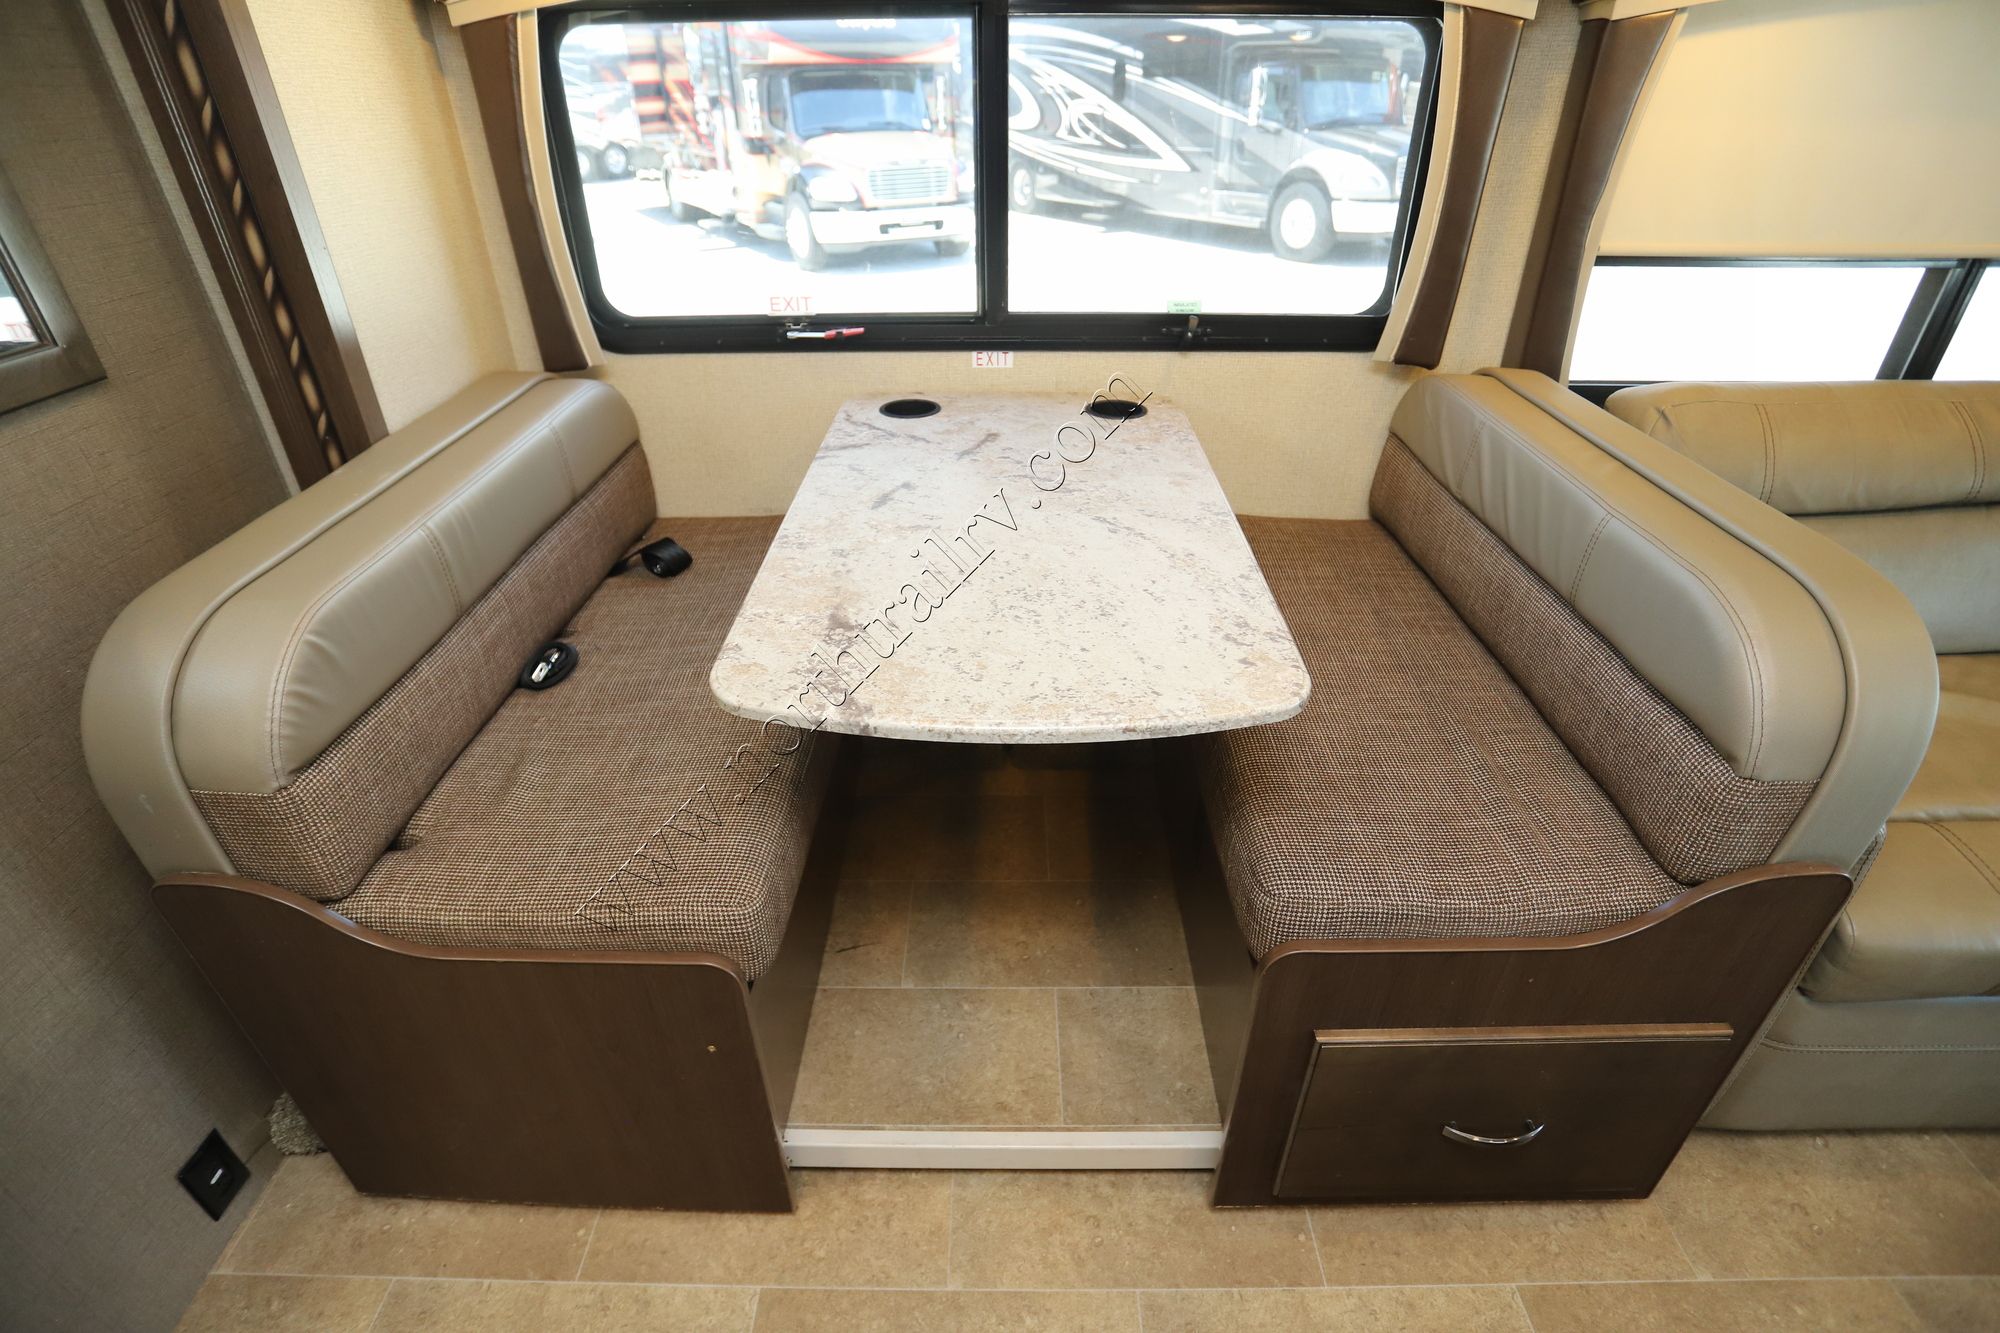 Used 2017 Thor Chateau 31L Class C  For Sale